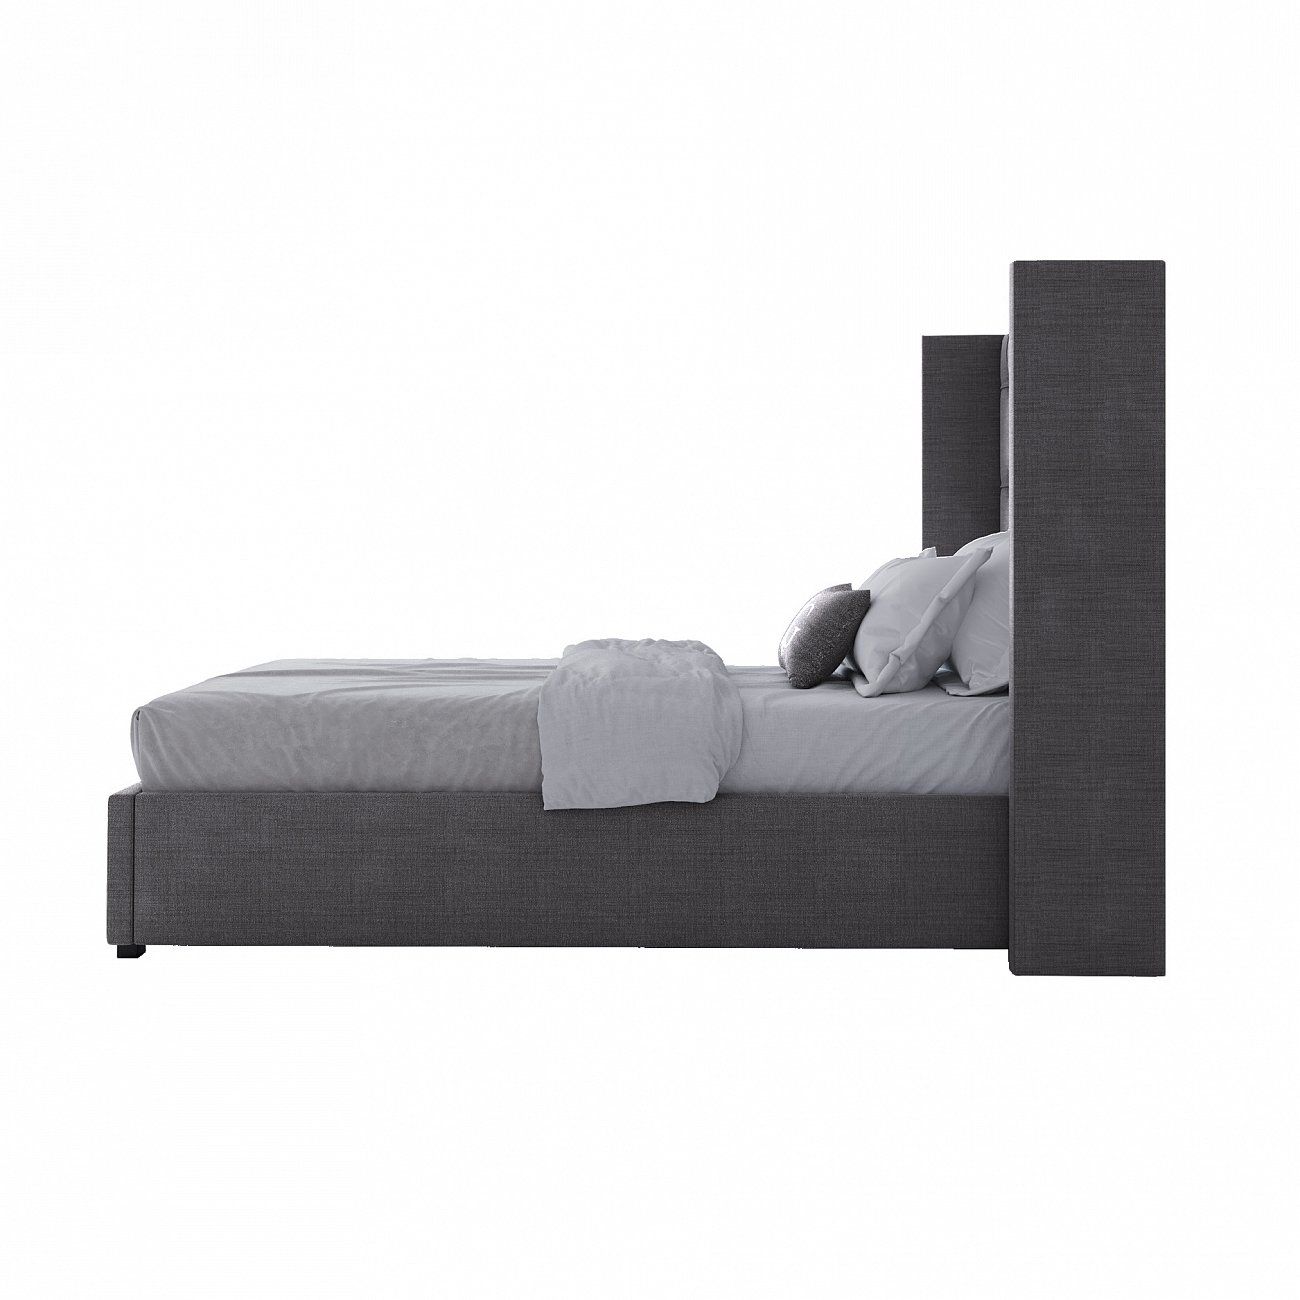 Single bed with upholstered headboard 90x200 cm dark grey Wing-2